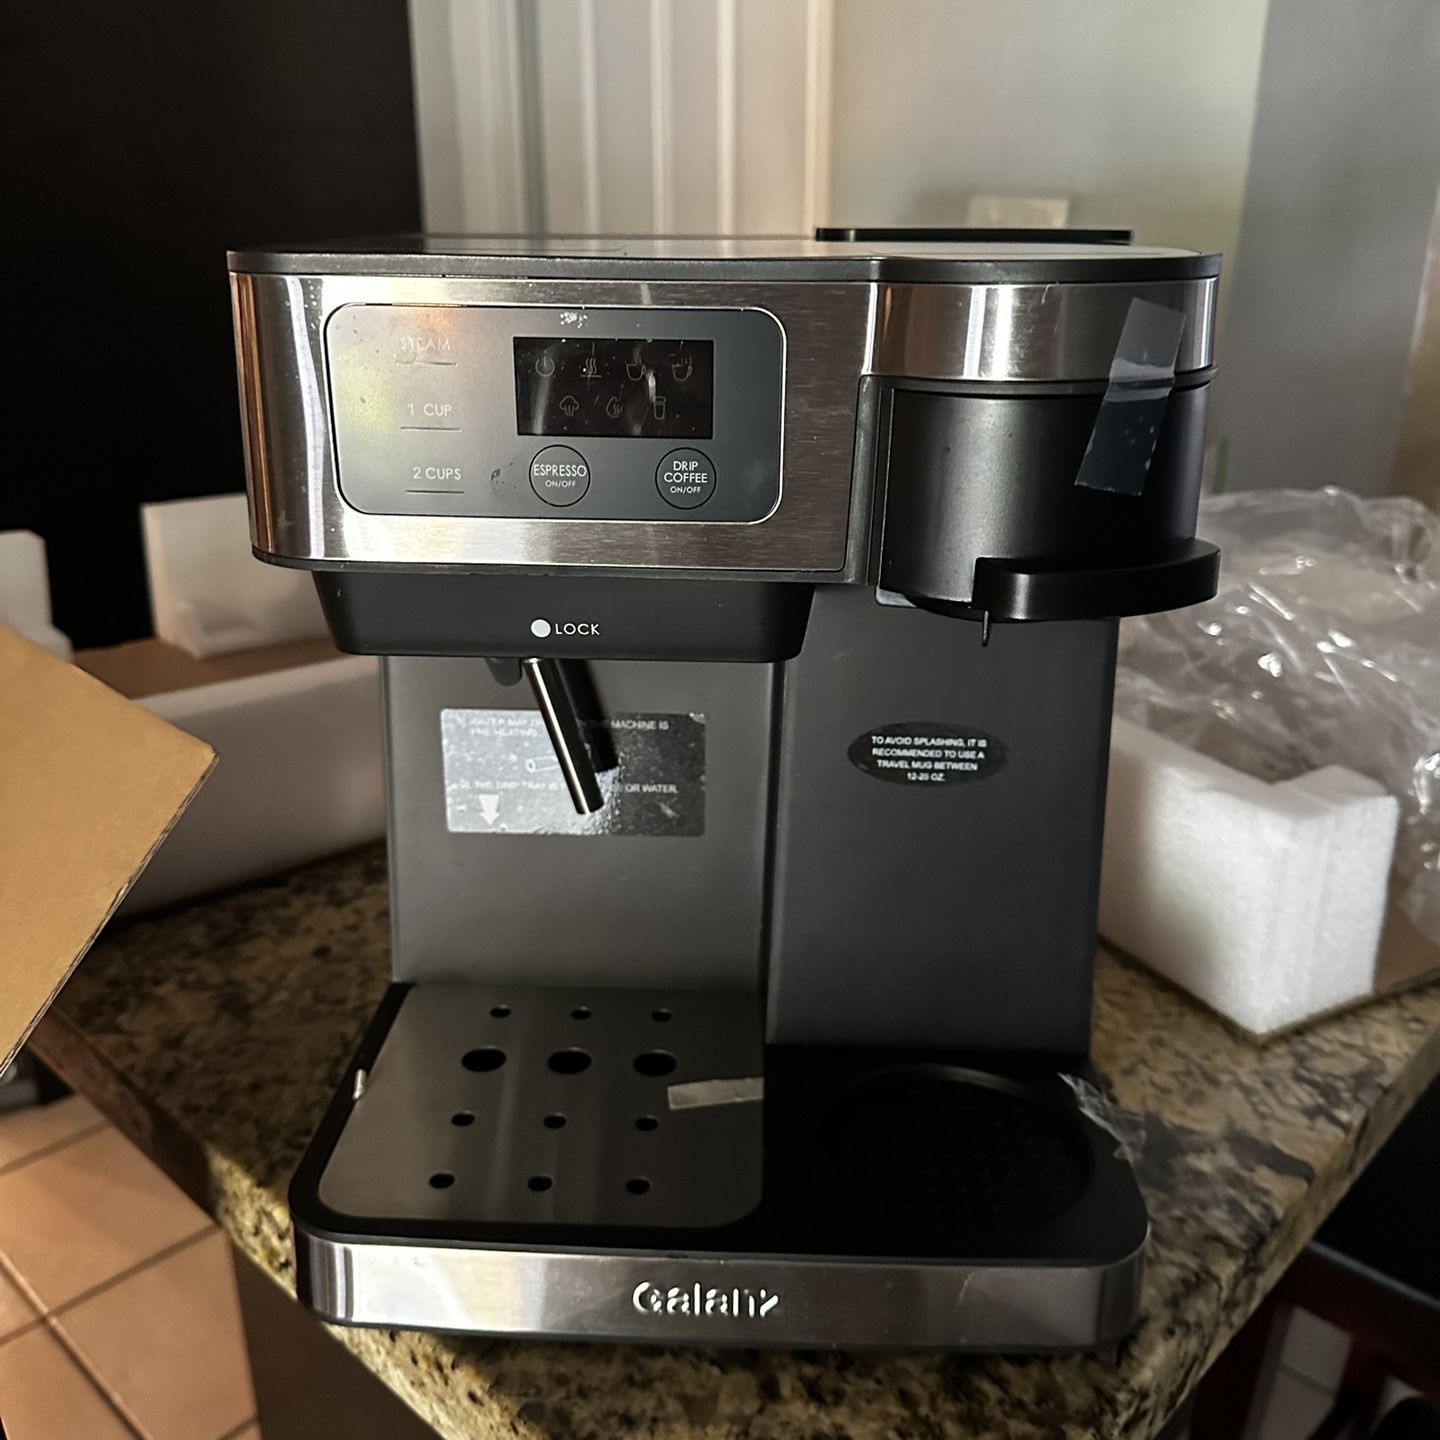 Galanz 2-in-1 Pump Espresso Machine & Single Serve Coffee Maker with Milk  Frother, Latte